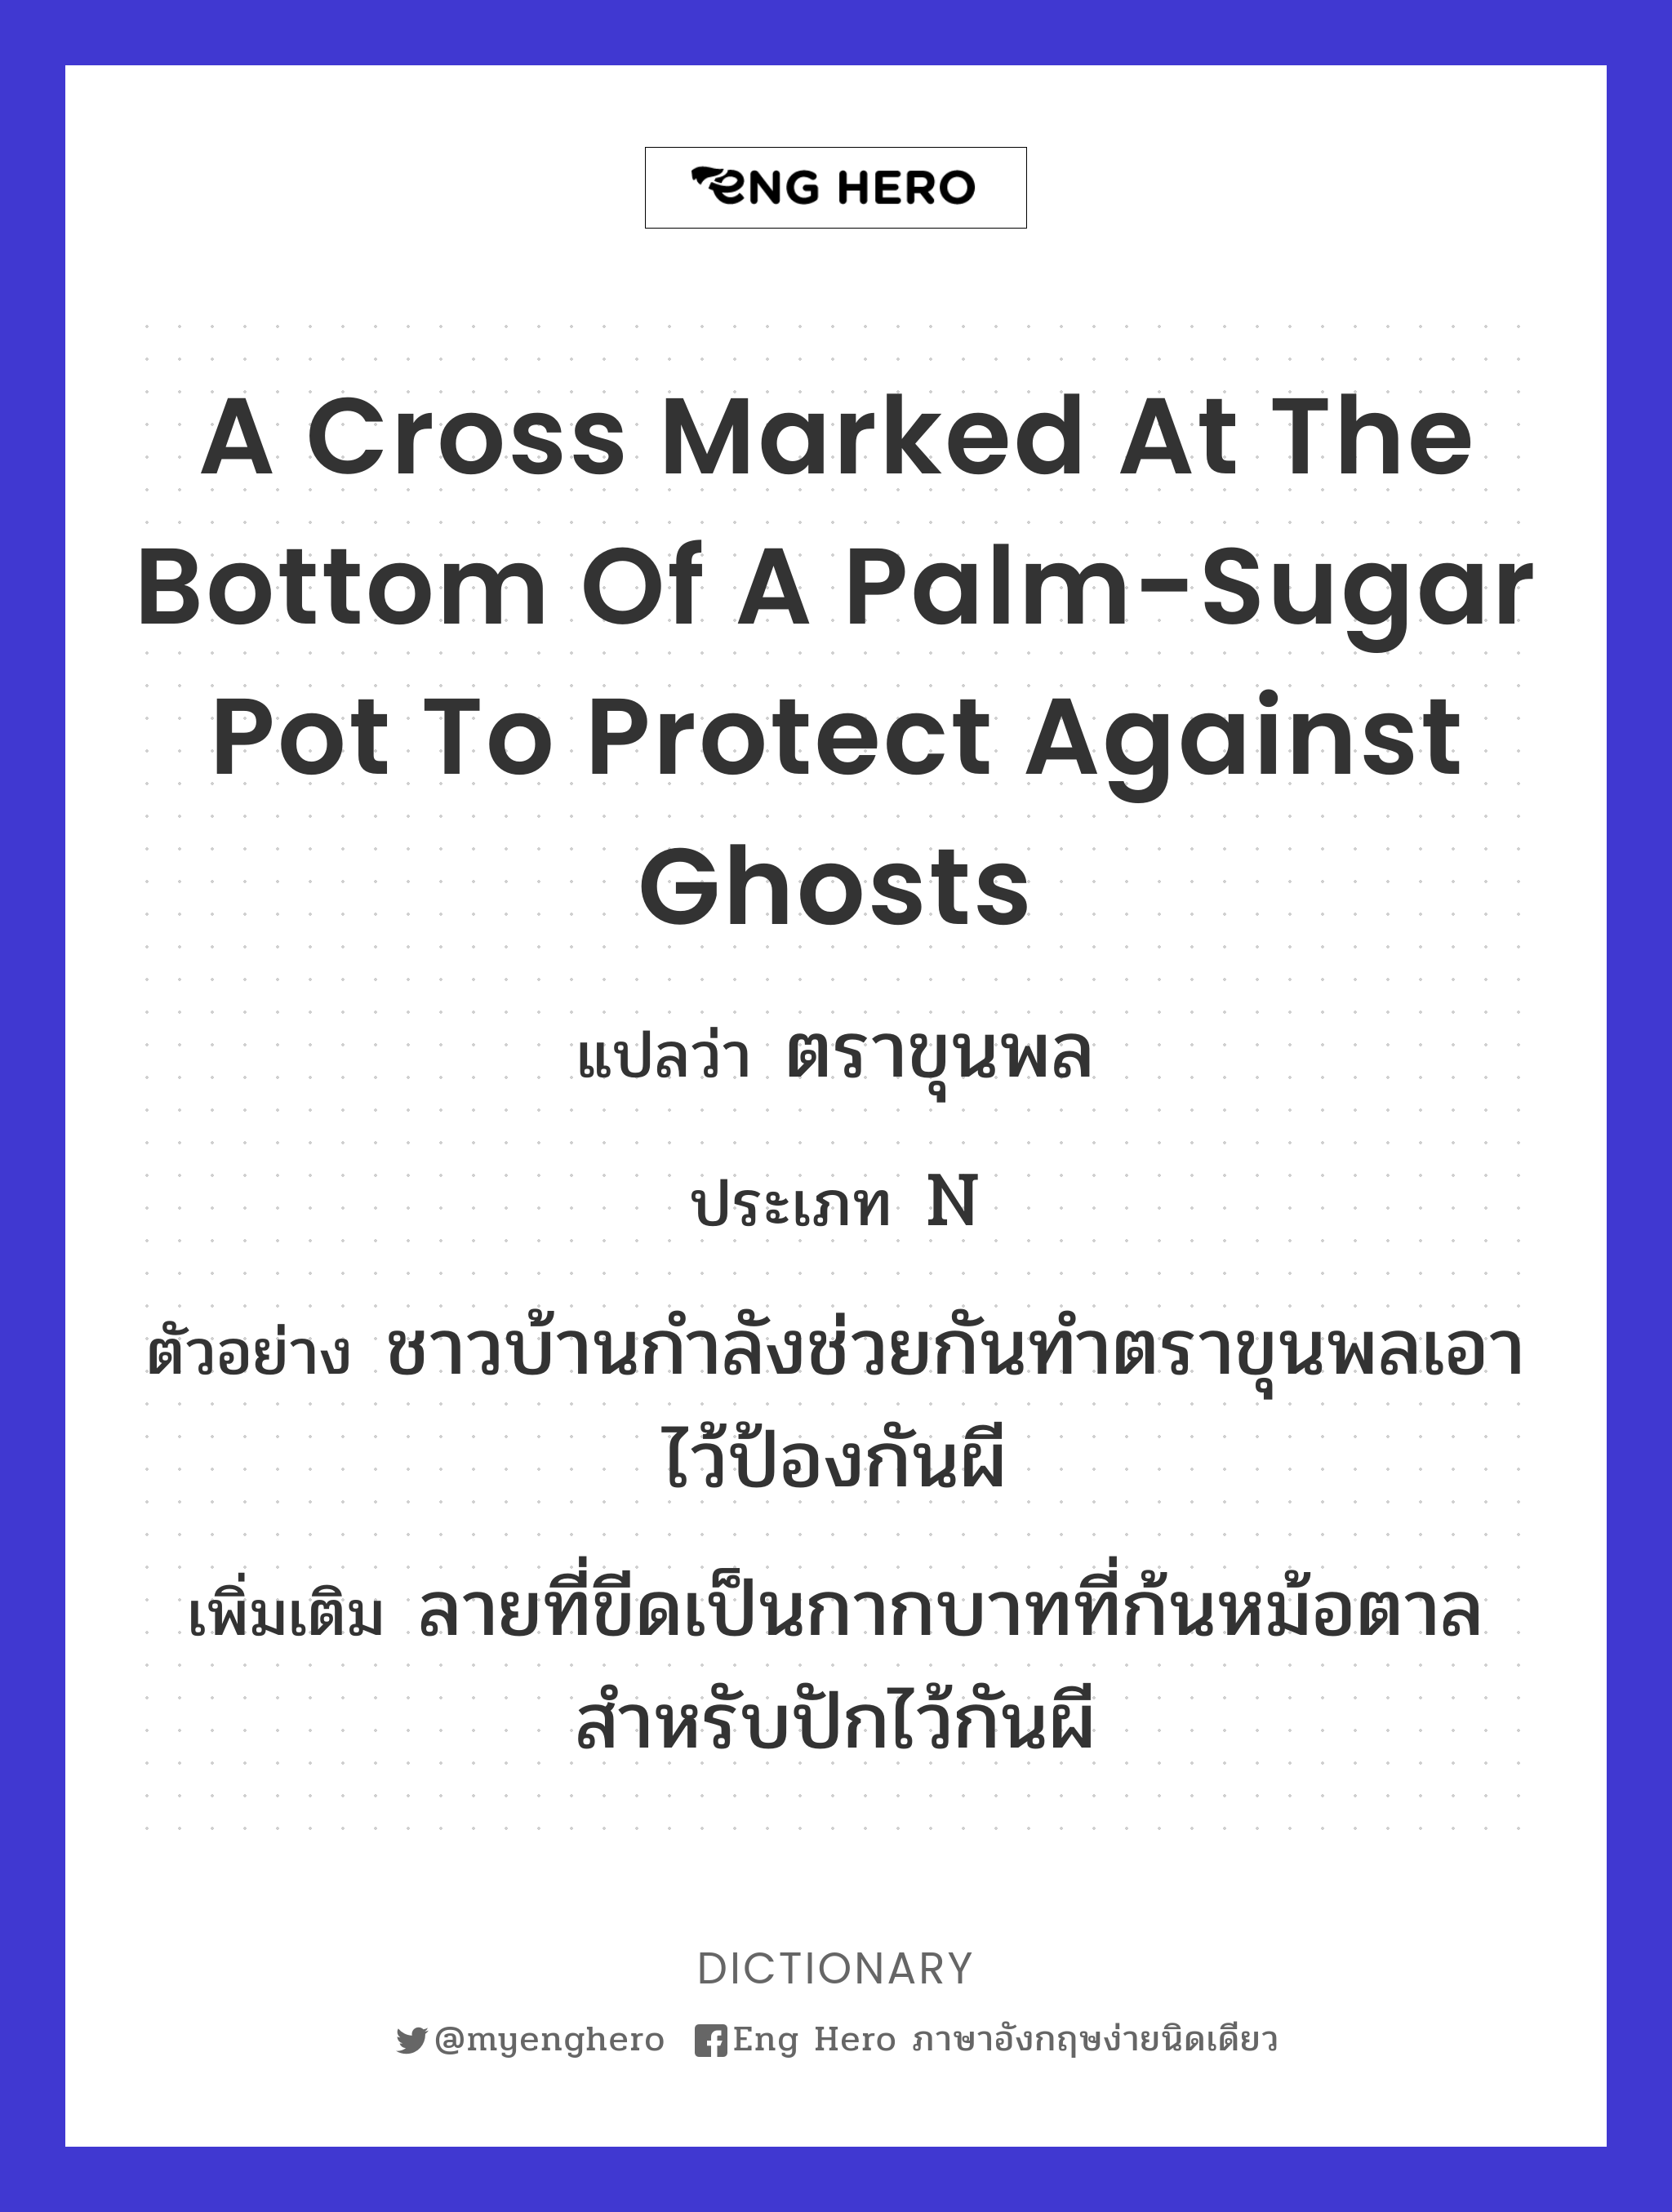 a cross marked at the bottom of a palm-sugar pot to protect against ghosts